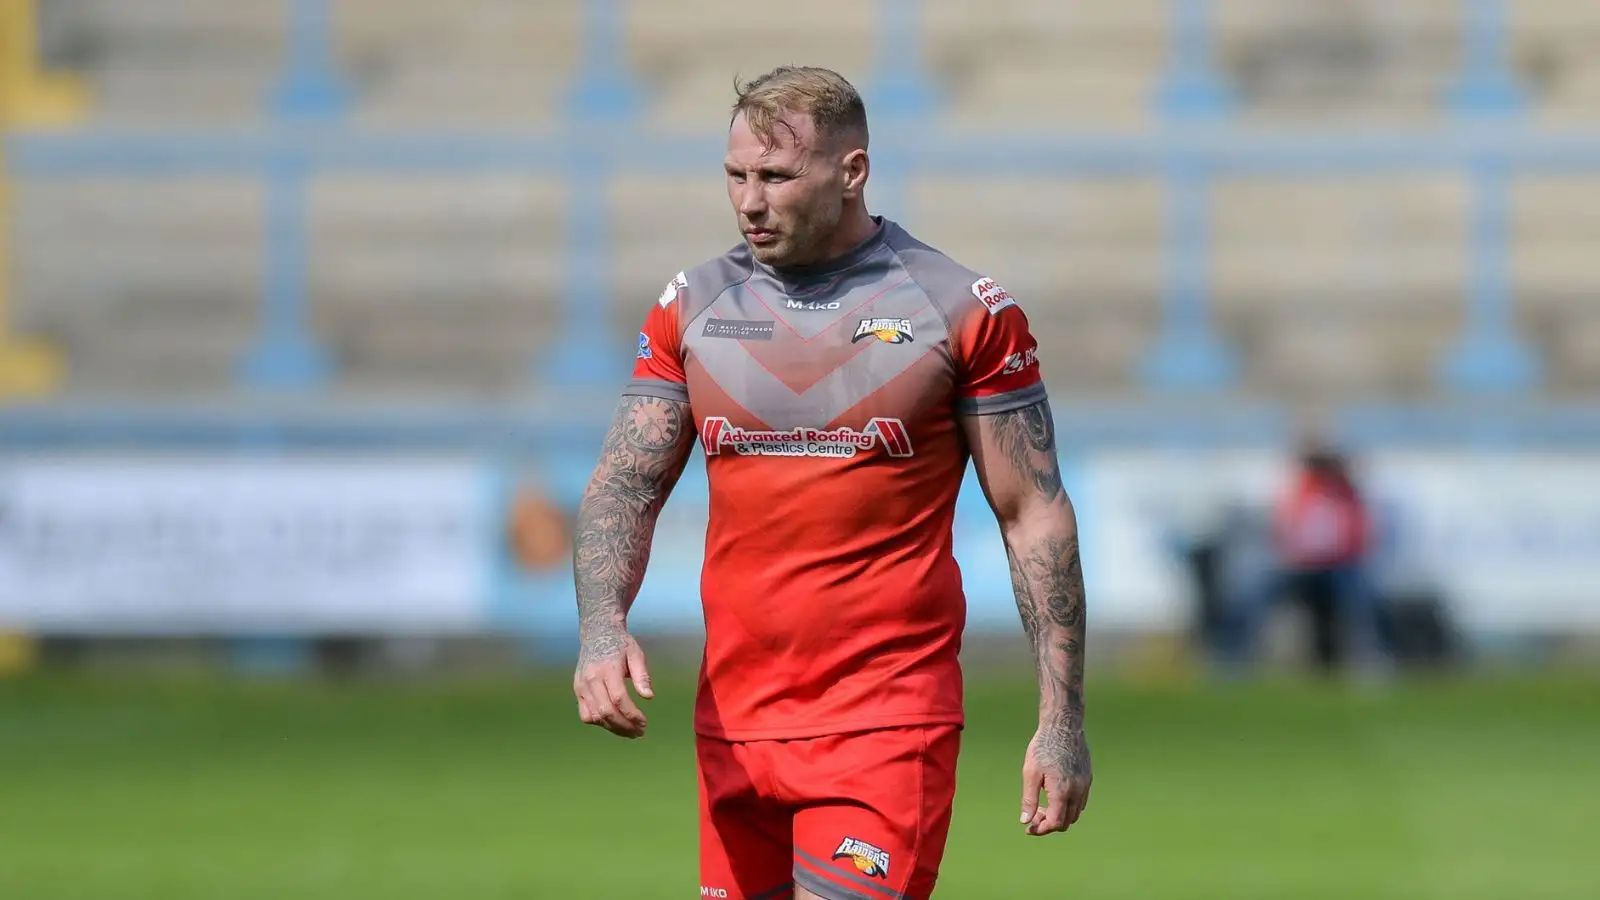 Widnes Vikings make seventh signing ahead of 2024 in shape of experienced forward: ‘He’s a player that every Championship team would want’